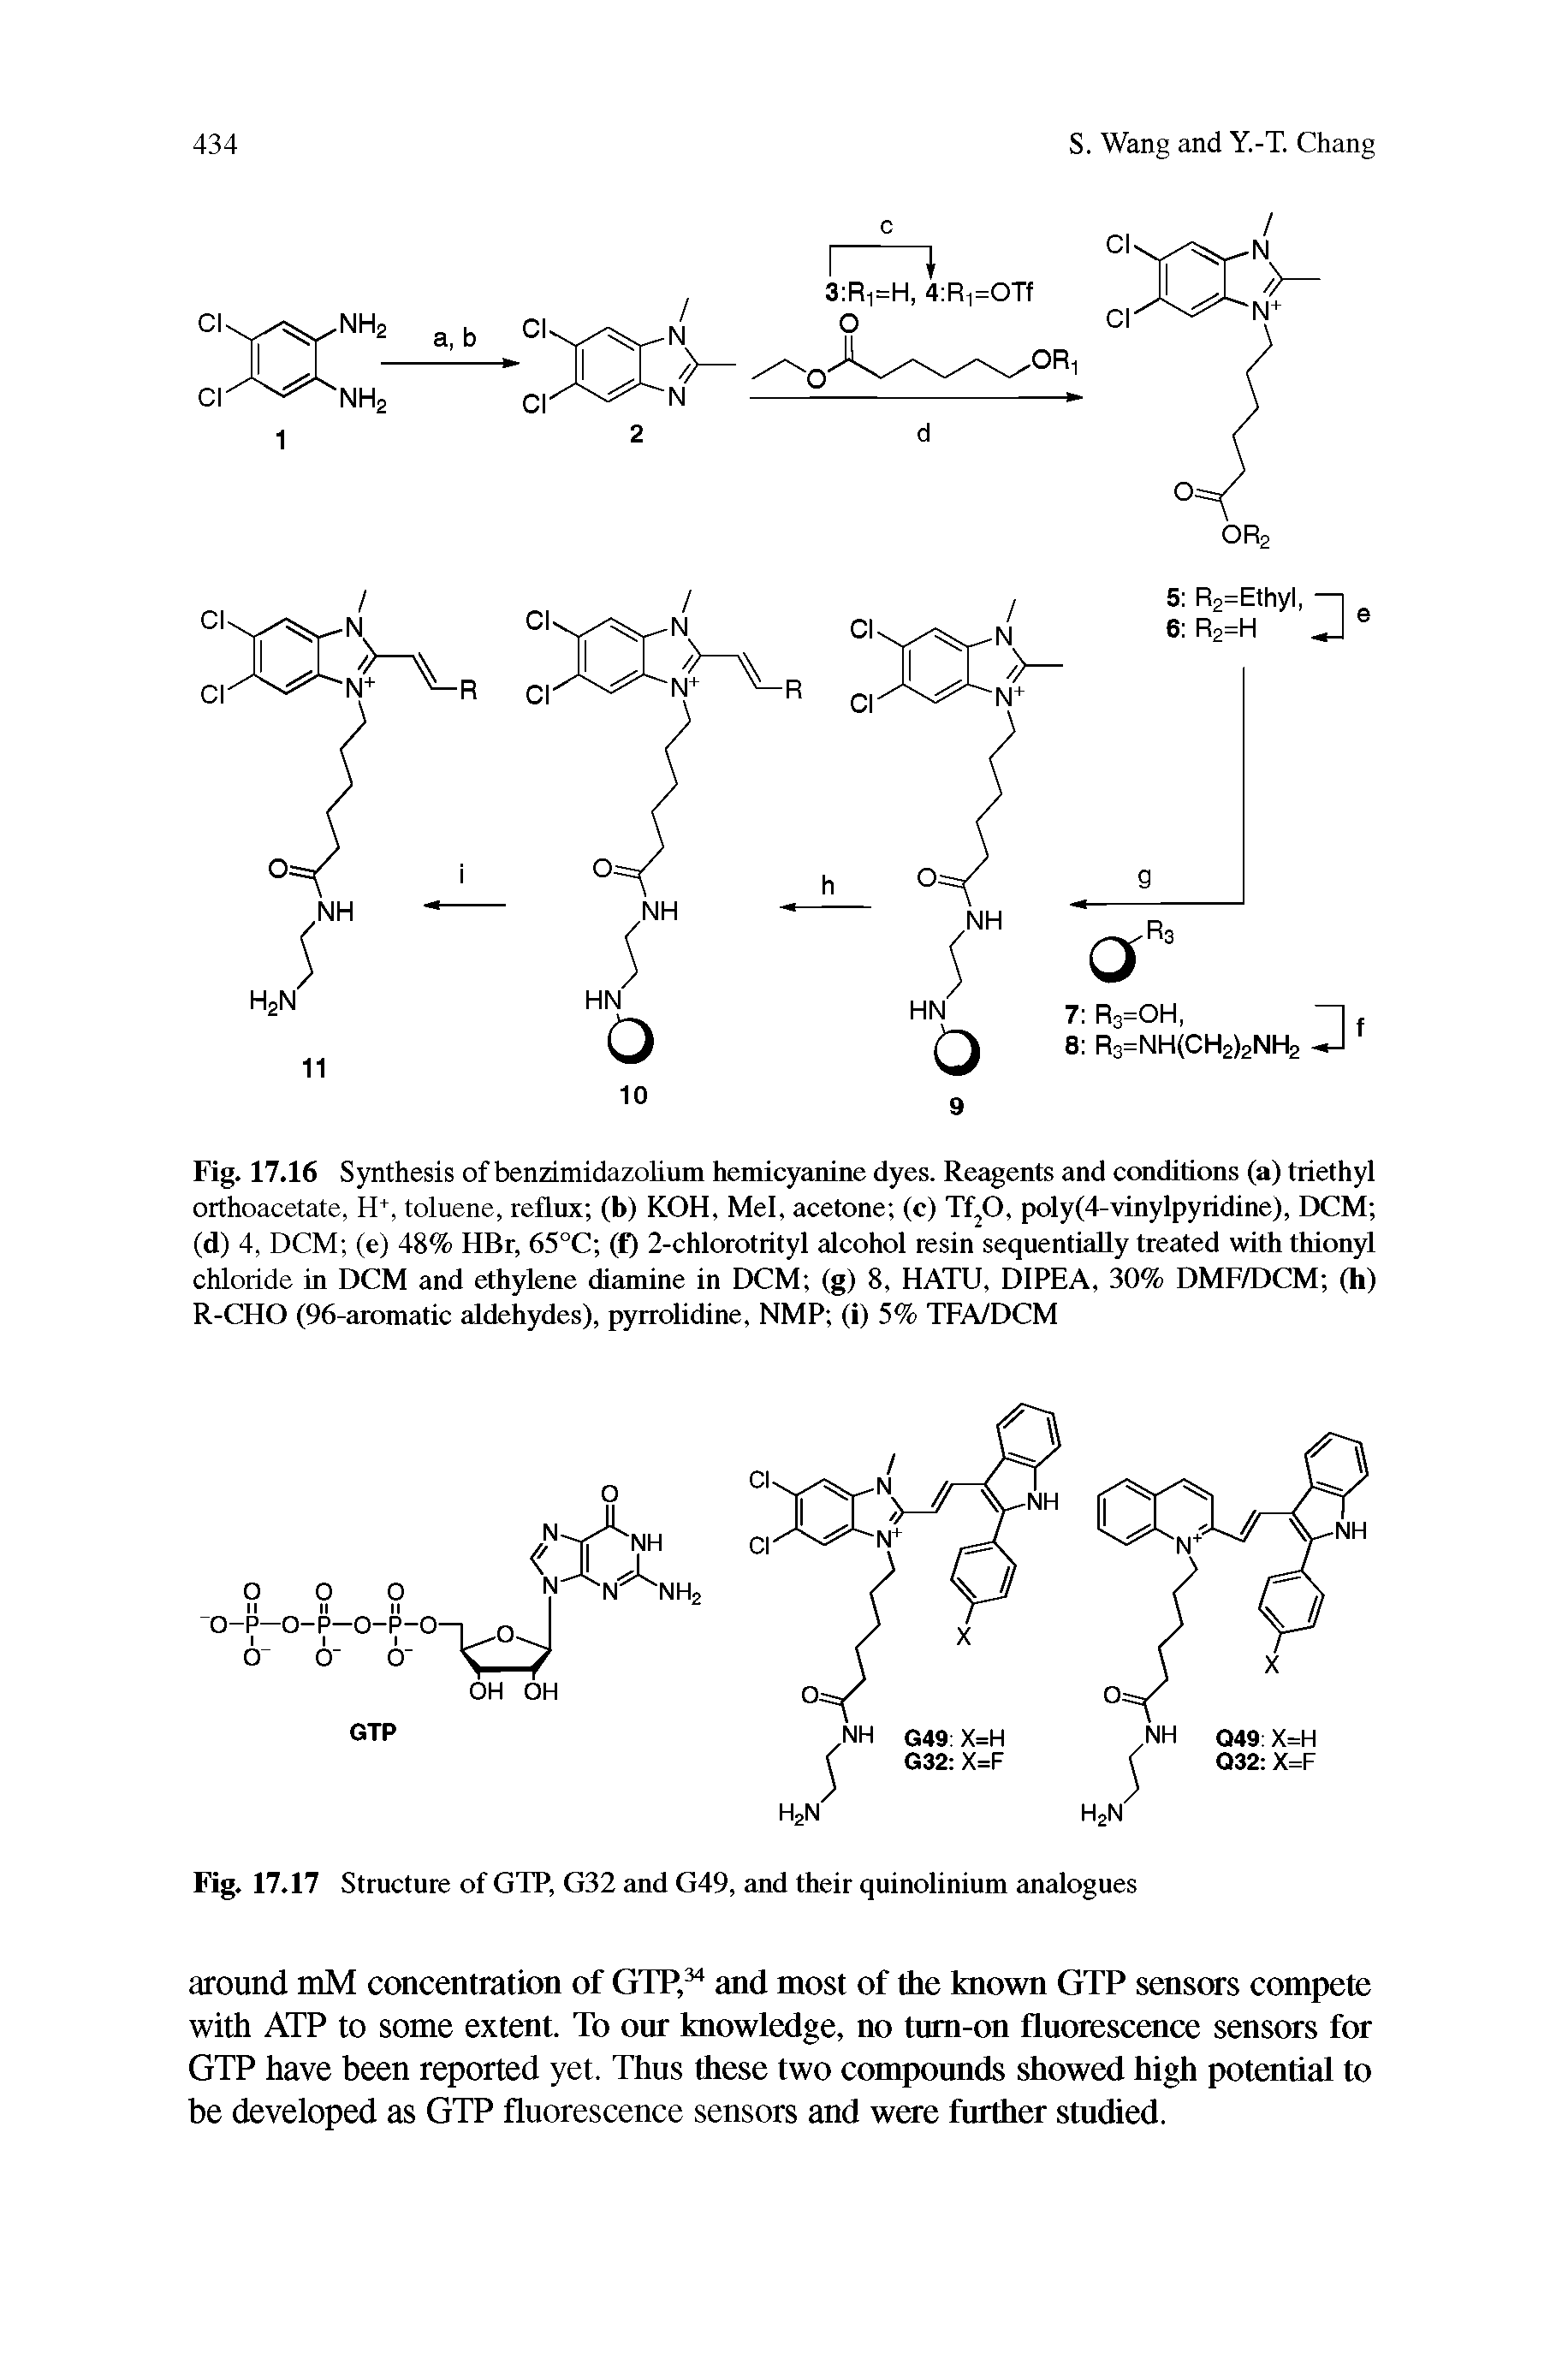 Fig. 17.16 Synthesis of benzimidazolium hemicyanine dyes. Reagents and conditions (a) triethyl orthoacetate, H+, toluene, reflux (b) KOH, Mel, acetone (c) Tf20, poly(4-vinylpyridine), DCM (d) 4, DCM (e) 48% HBr, 65°C (f) 2-chlorotrityl alcohol resin sequentially treated with thionyl chloride in DCM and ethylene diamine in DCM (g) 8, HATU, DIPEA, 30% DMF/DCM (h) R-CHO (96-aromatic aldehydes), pyrrolidine, NMP (i) 5% TFA/DCM...